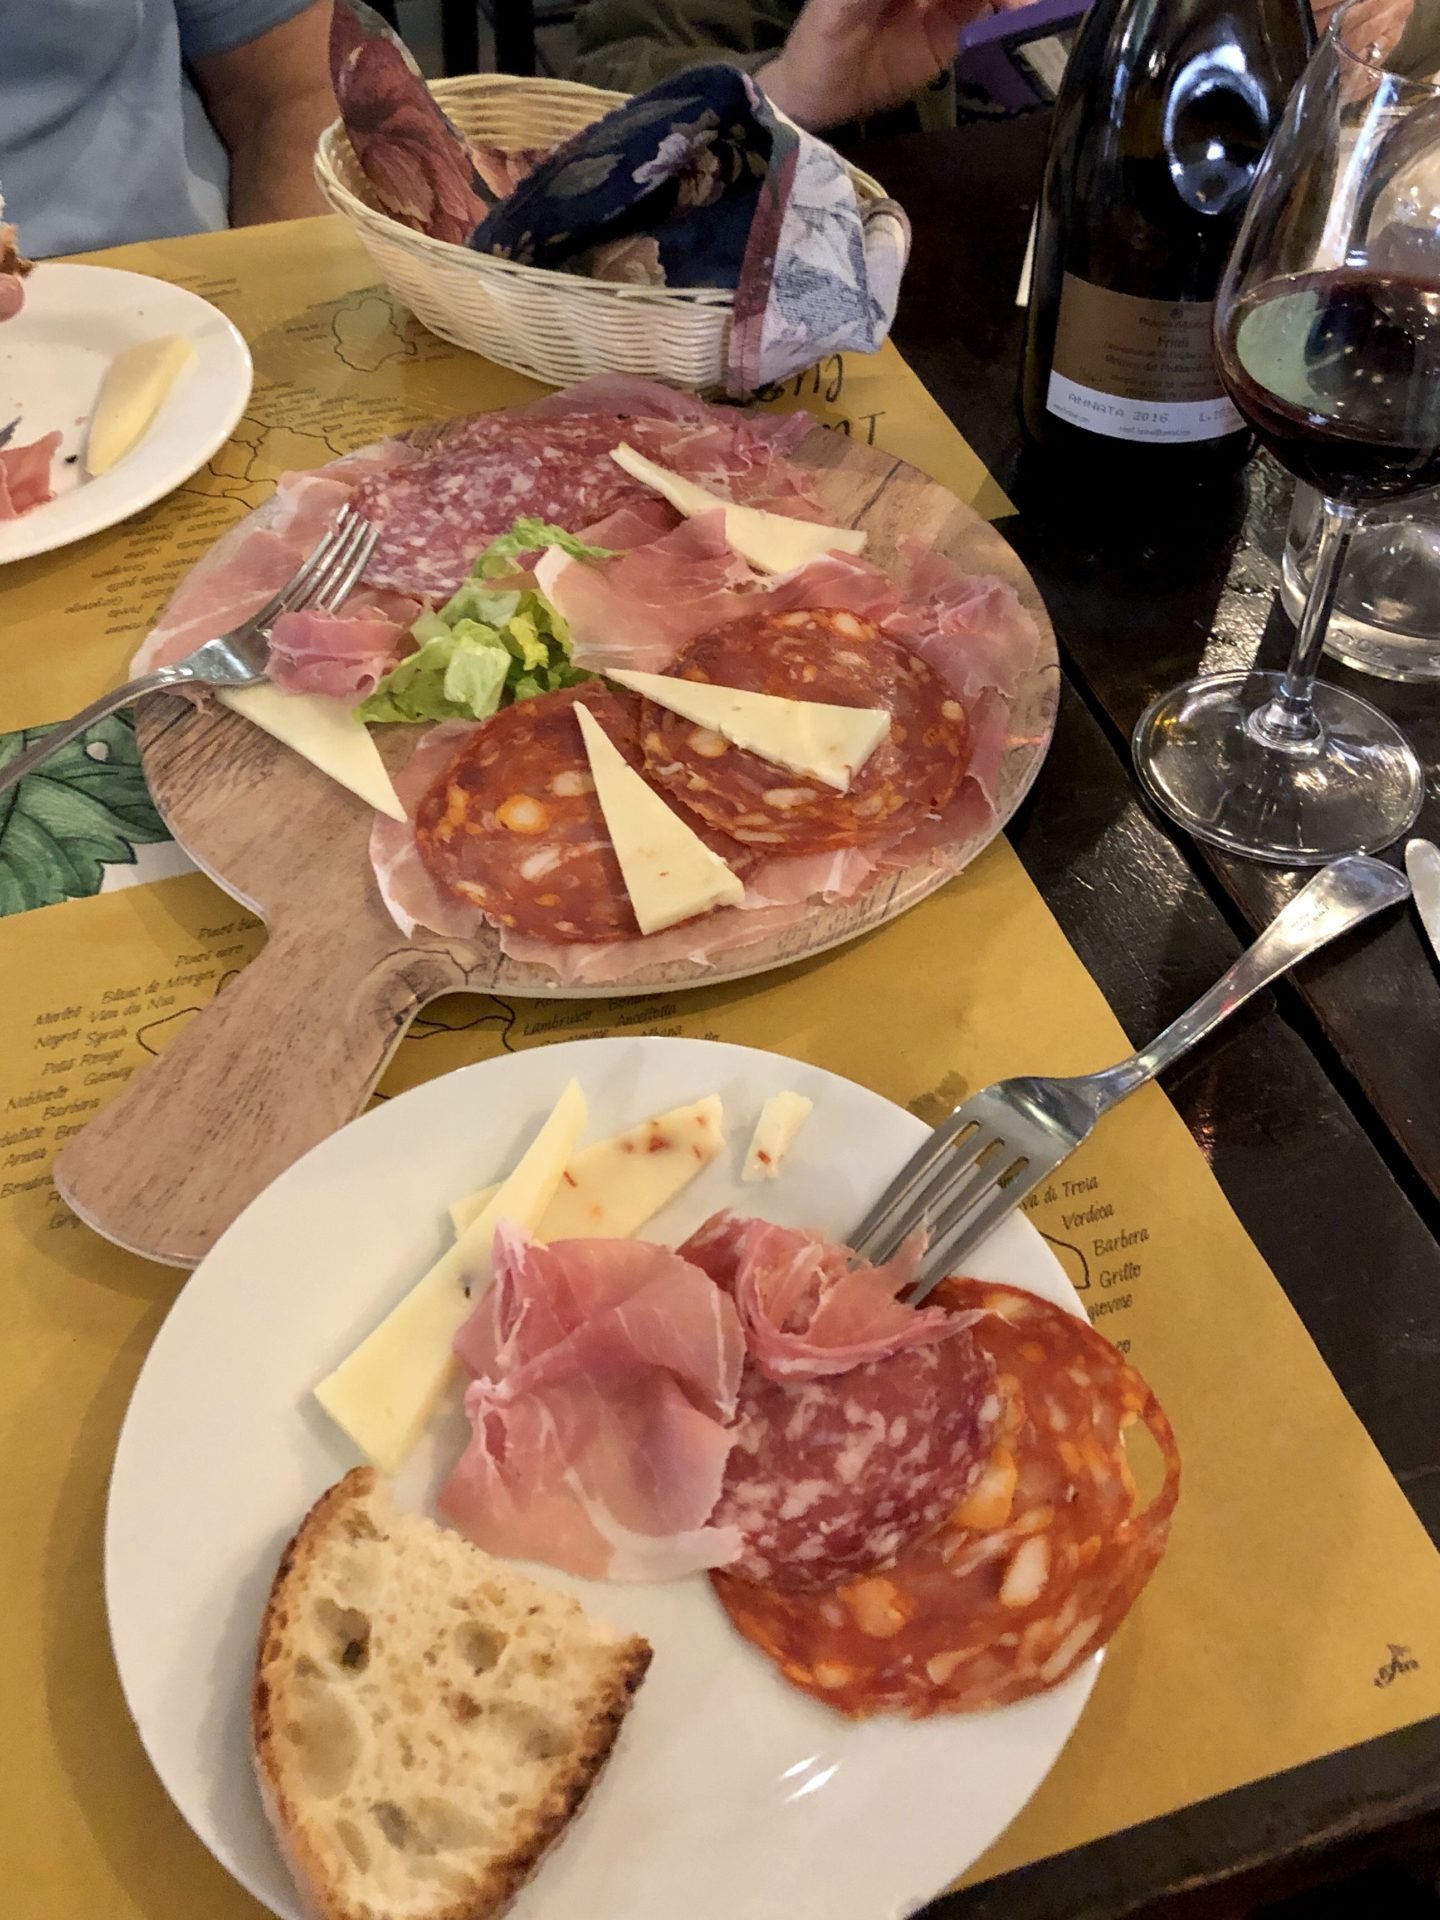 The Wine was a Refossco made with a young grape from the area of Refossco it  certainly went down a treat with our Italian Ham and Caciocavallo cheese.